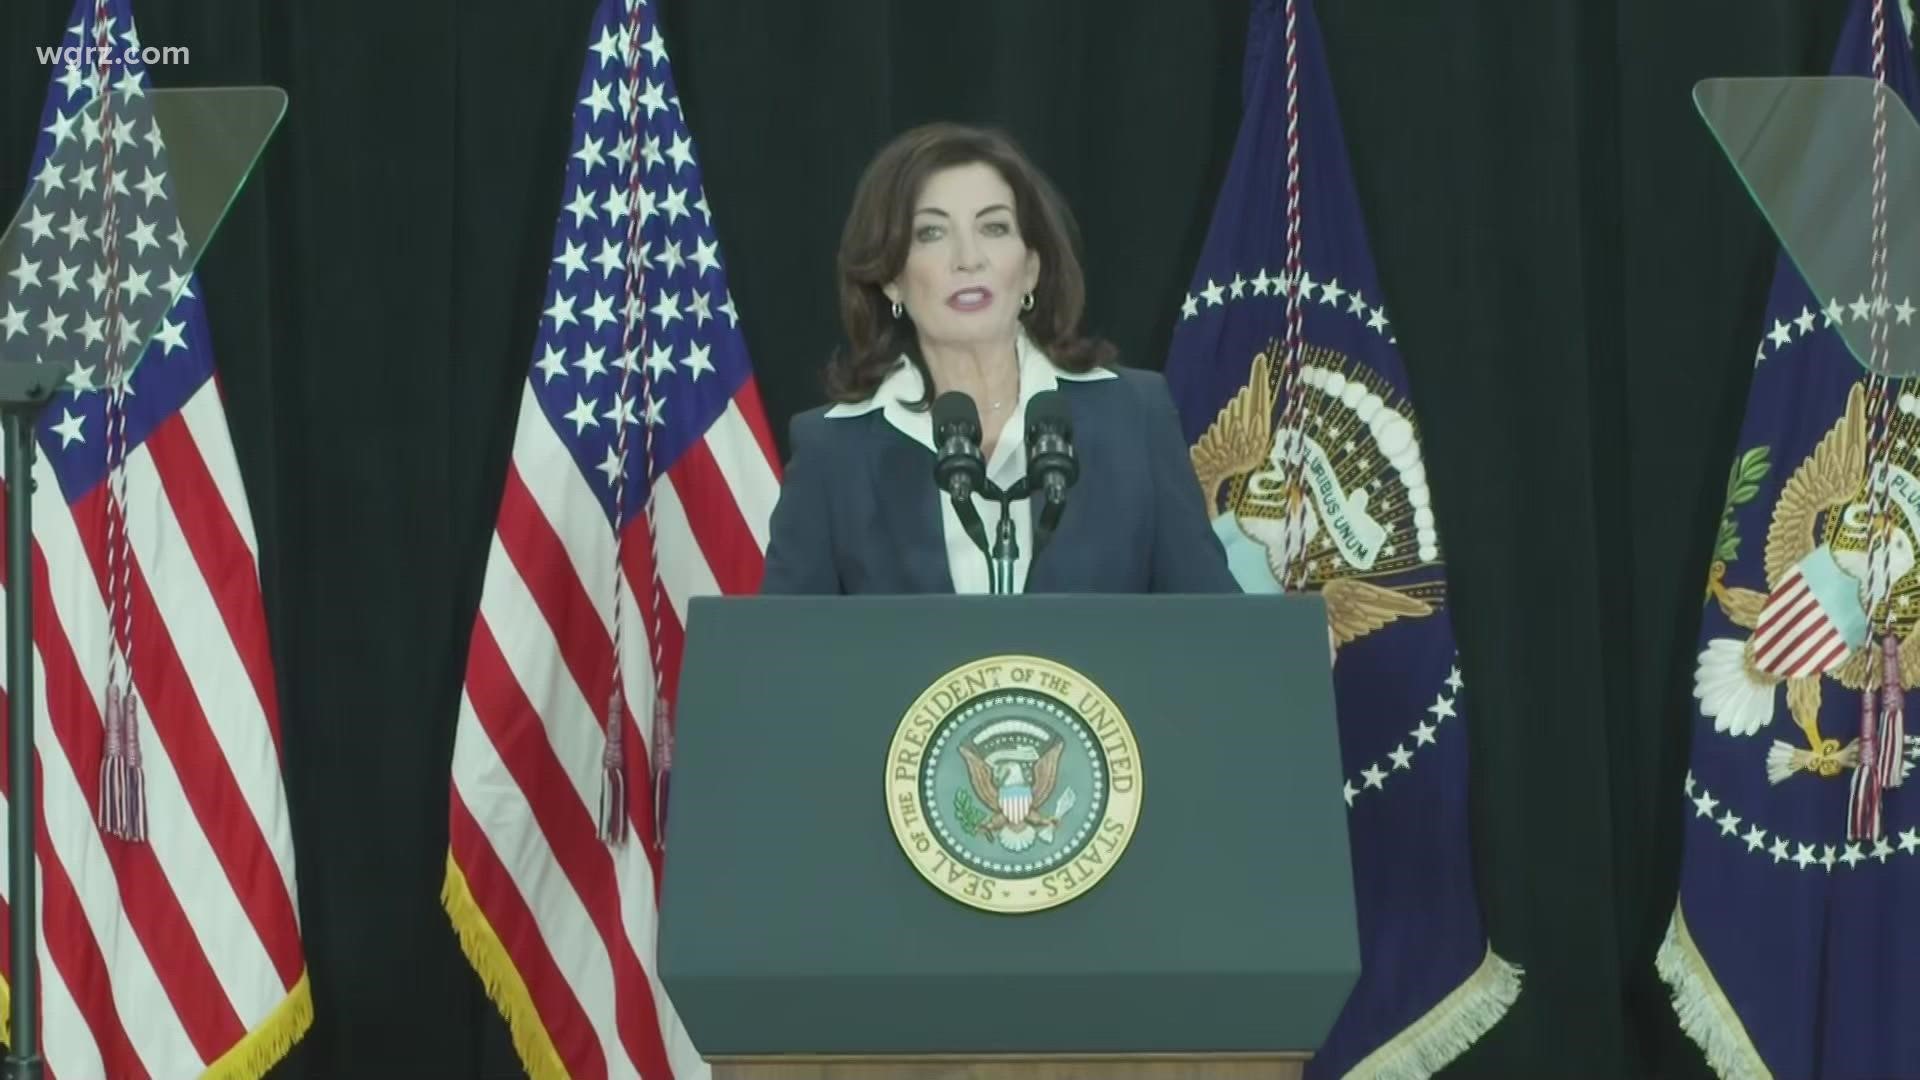 Gov. Kathy Hochul spoke at the Delavan Grider Community Center, ahead of President Biden's speech, three days after the mass shooting at Tops Market.